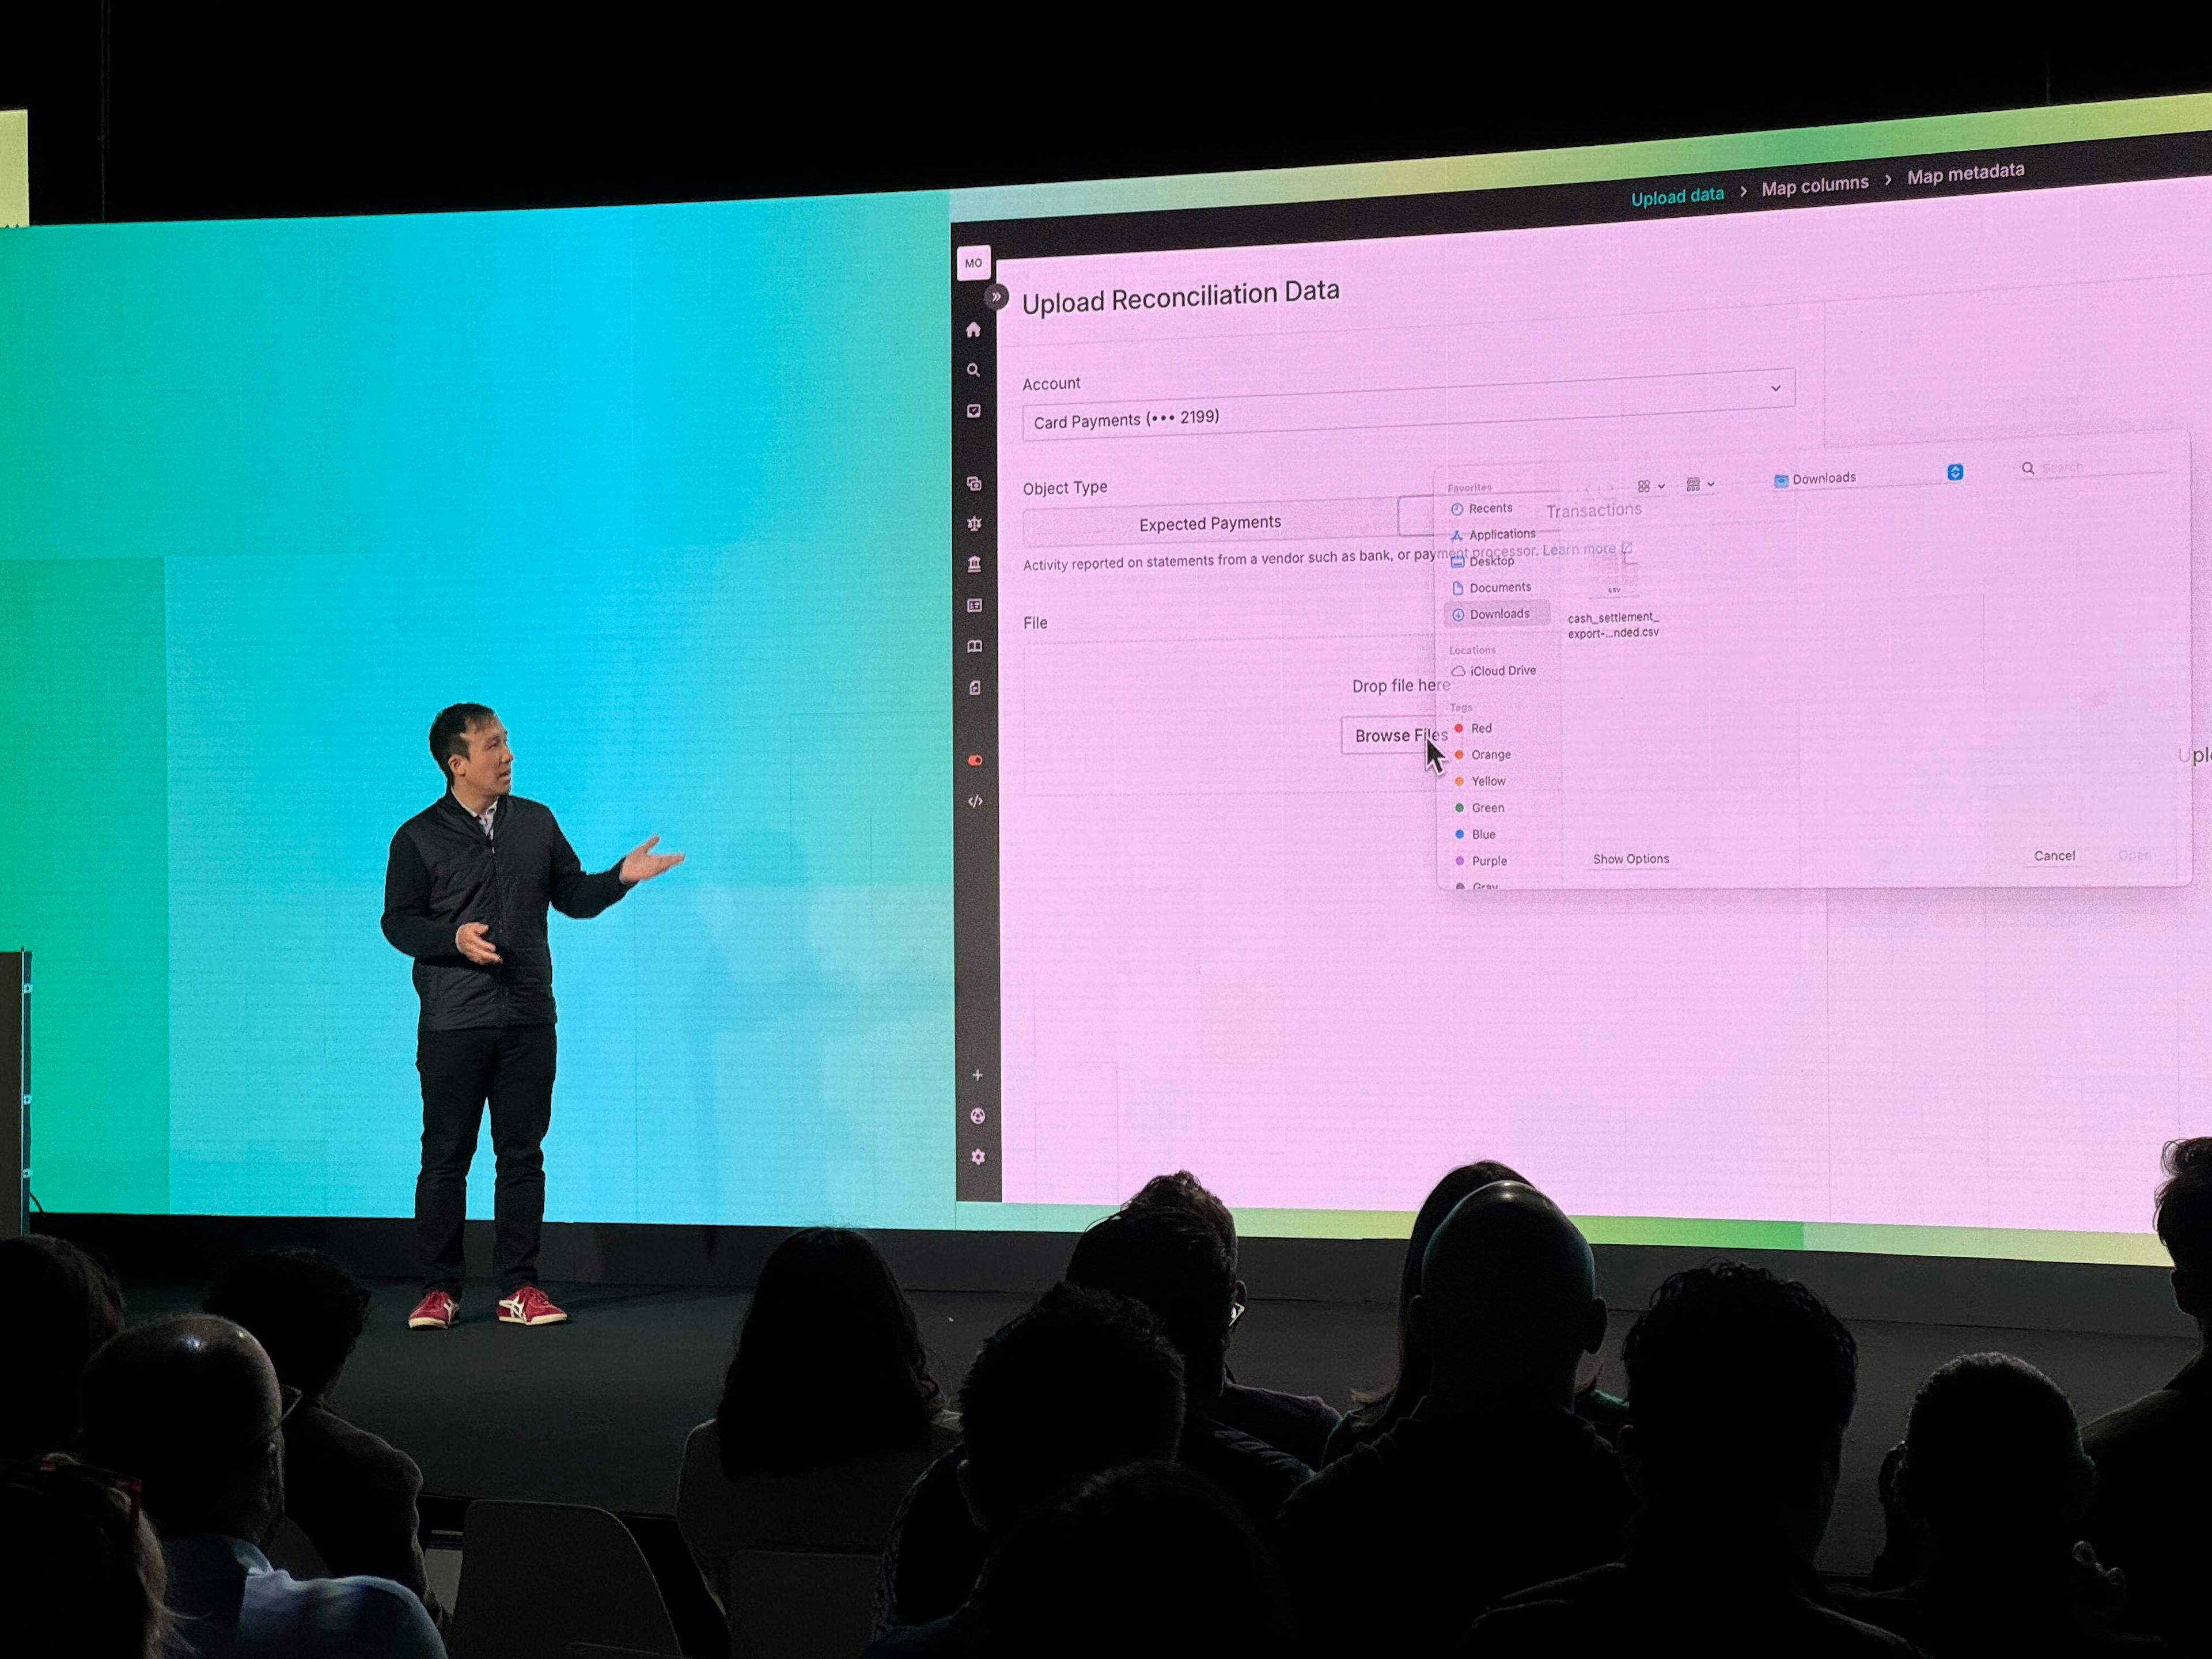 Wayne Lin, Modern Treasury’s Product Lead for Reconciliation, presenting the demo of our new Reconciliation features.